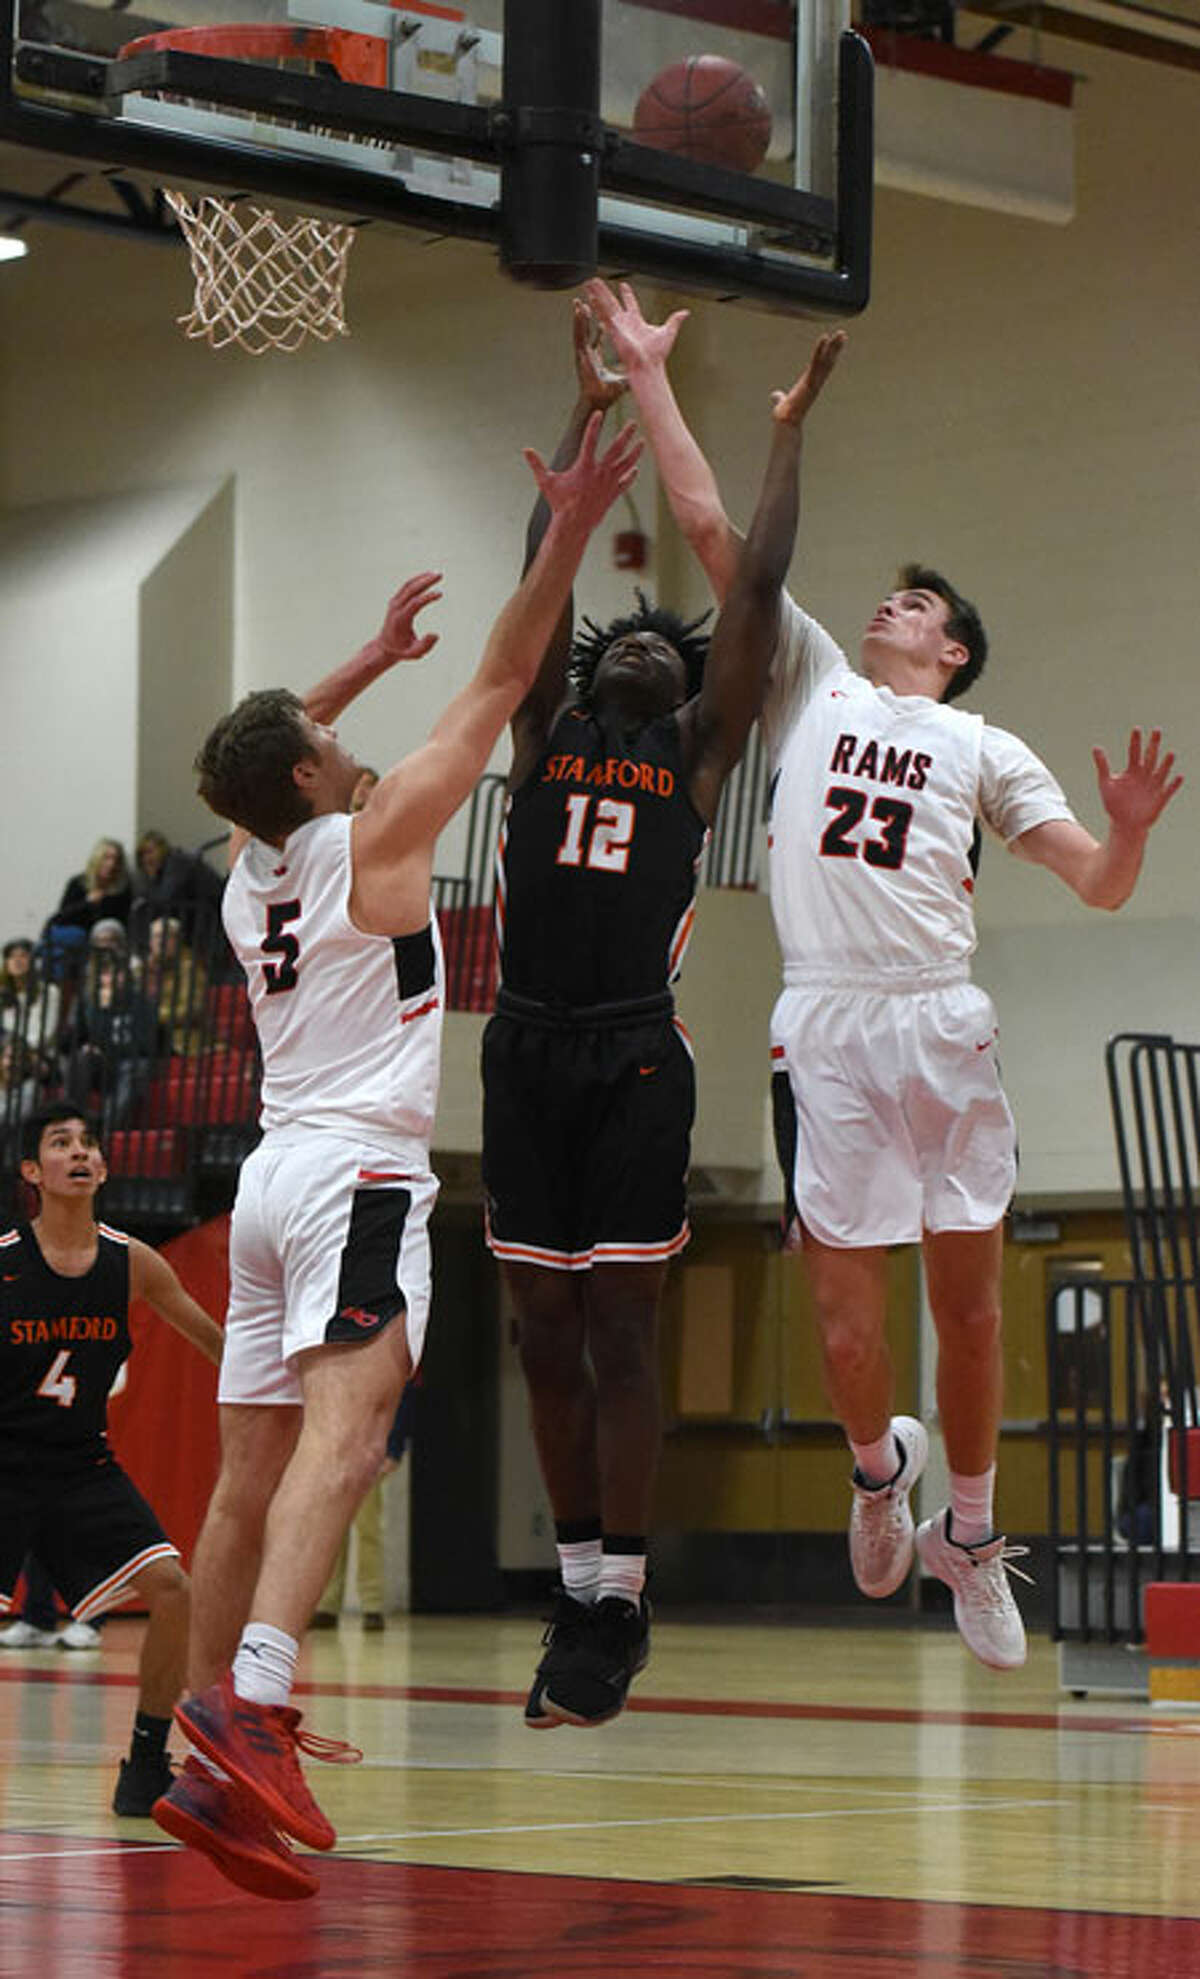 New Canaan’s Jack Richardson (23) and Alex Gibbens (5), along with Stamford’s Danny Simms (12), go up for a rebound on Thursday, Jan. 10, at NCHS.